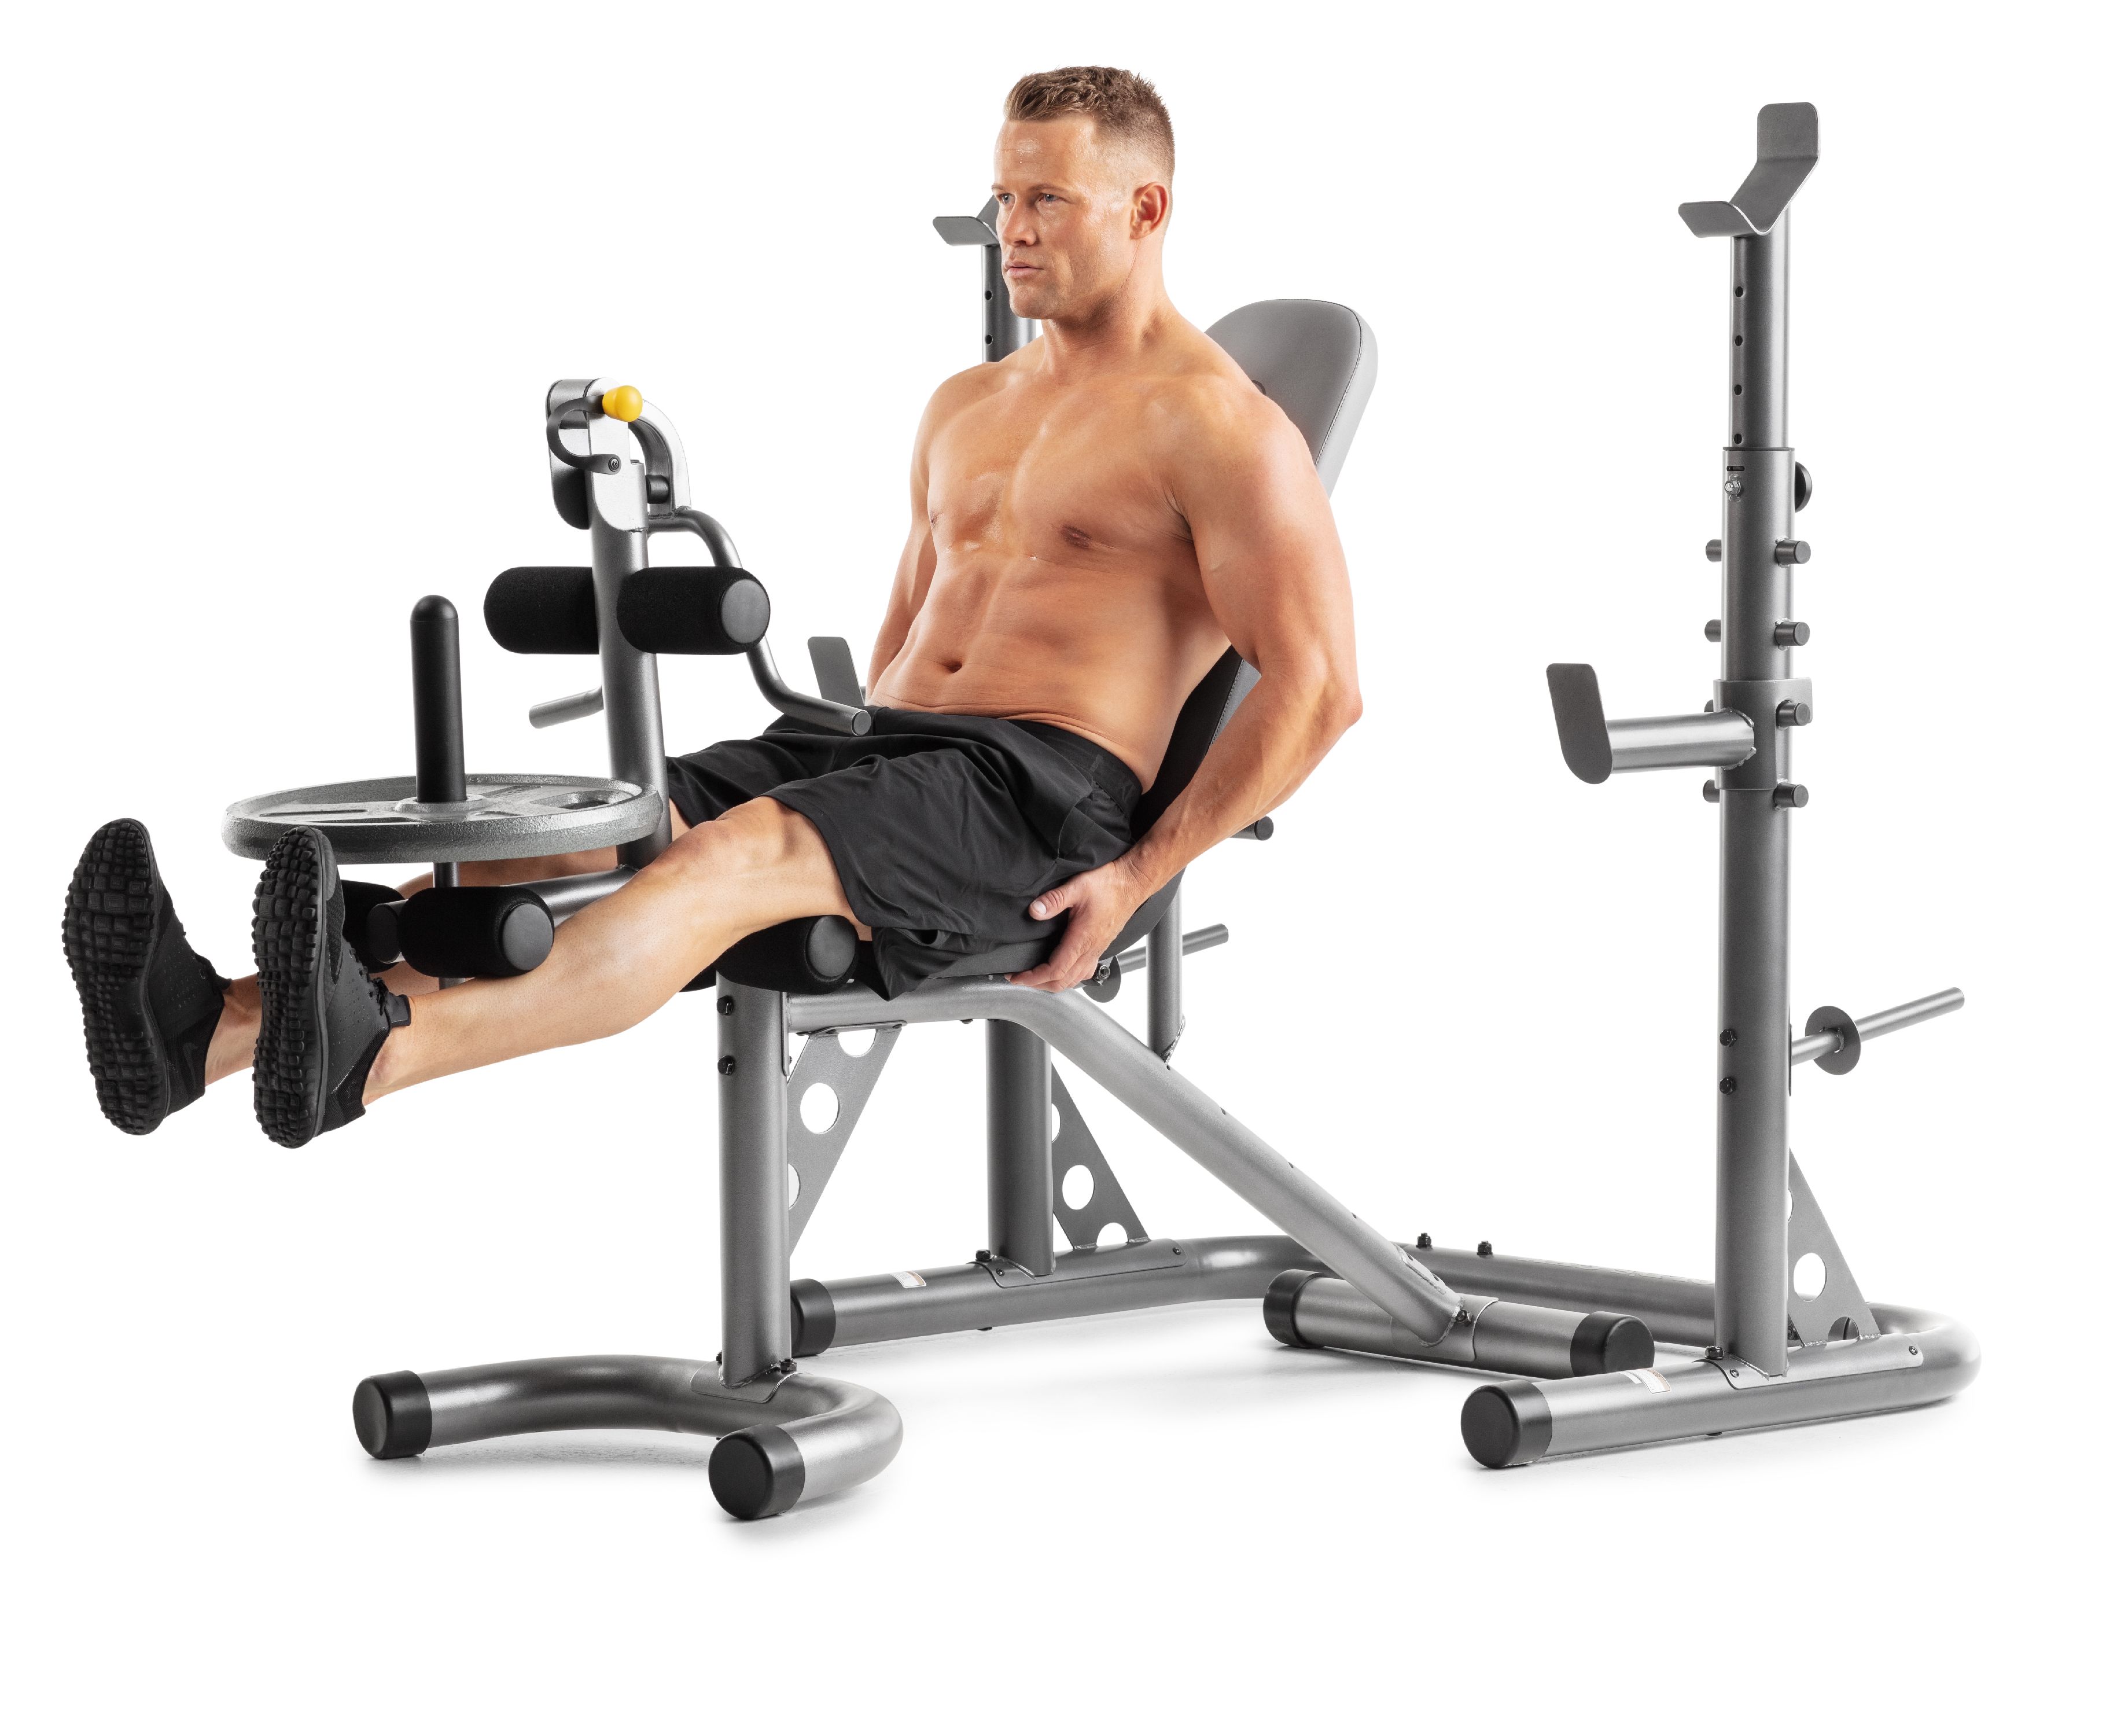 Gold's Gym XRS 20 Adjustable Olympic Workout Bench with Squat Rack, Leg Extension, Preacher Curl, and Weight Storage - image 3 of 15